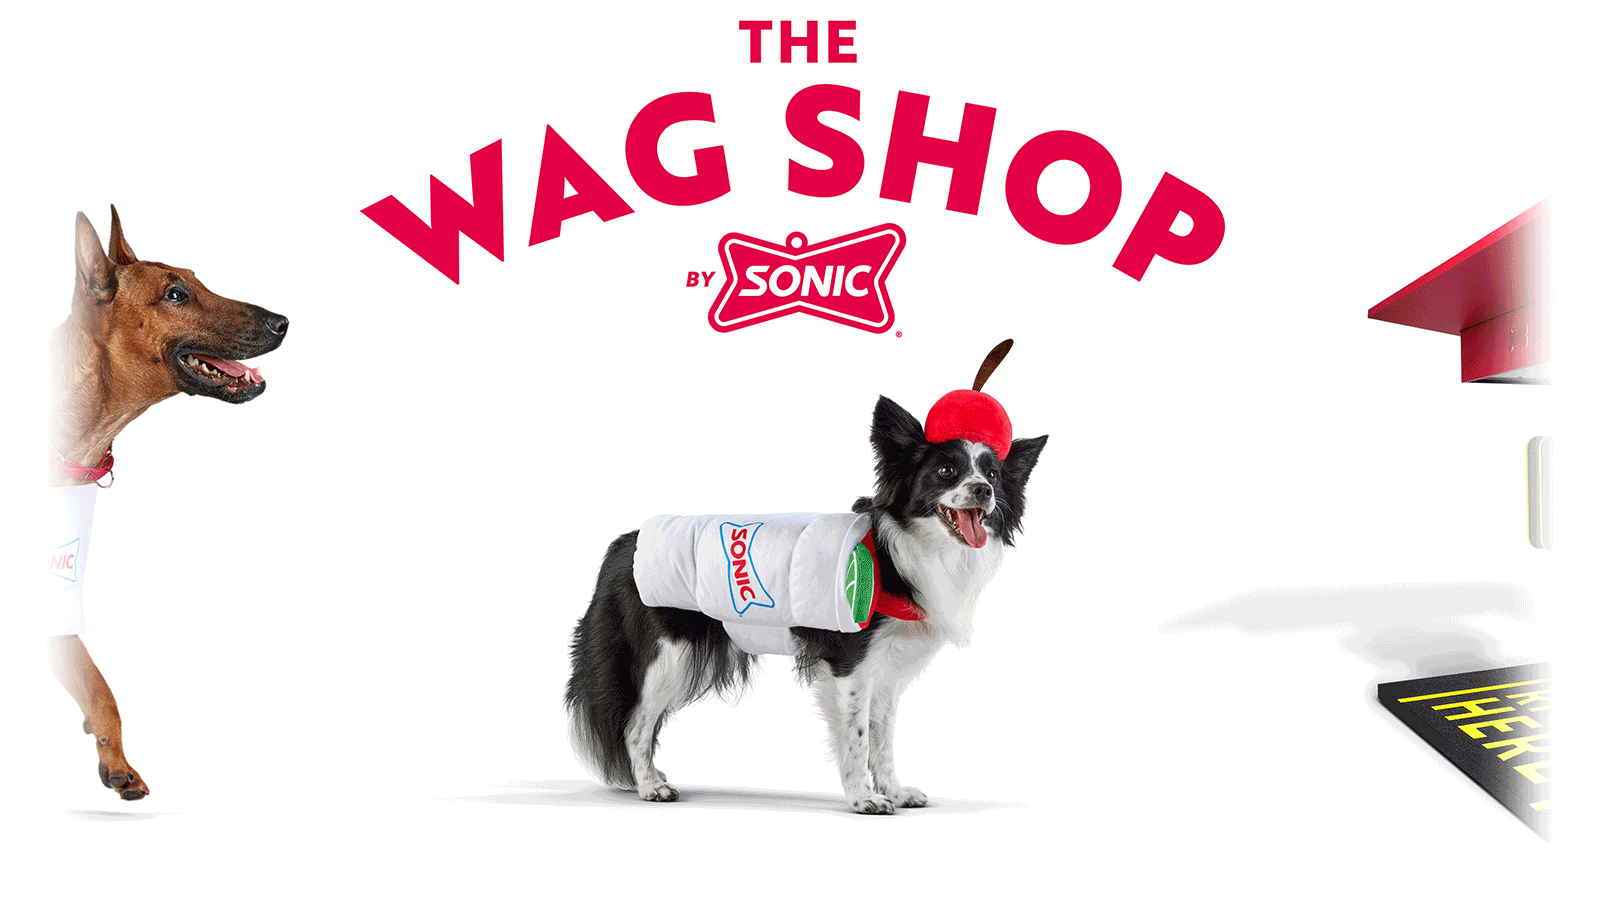 The WAG SHOP by SONIC showing a limeade and hot dog dog costumes, hat, bandanas and toys that look like a corn dog, tots and a limeade.